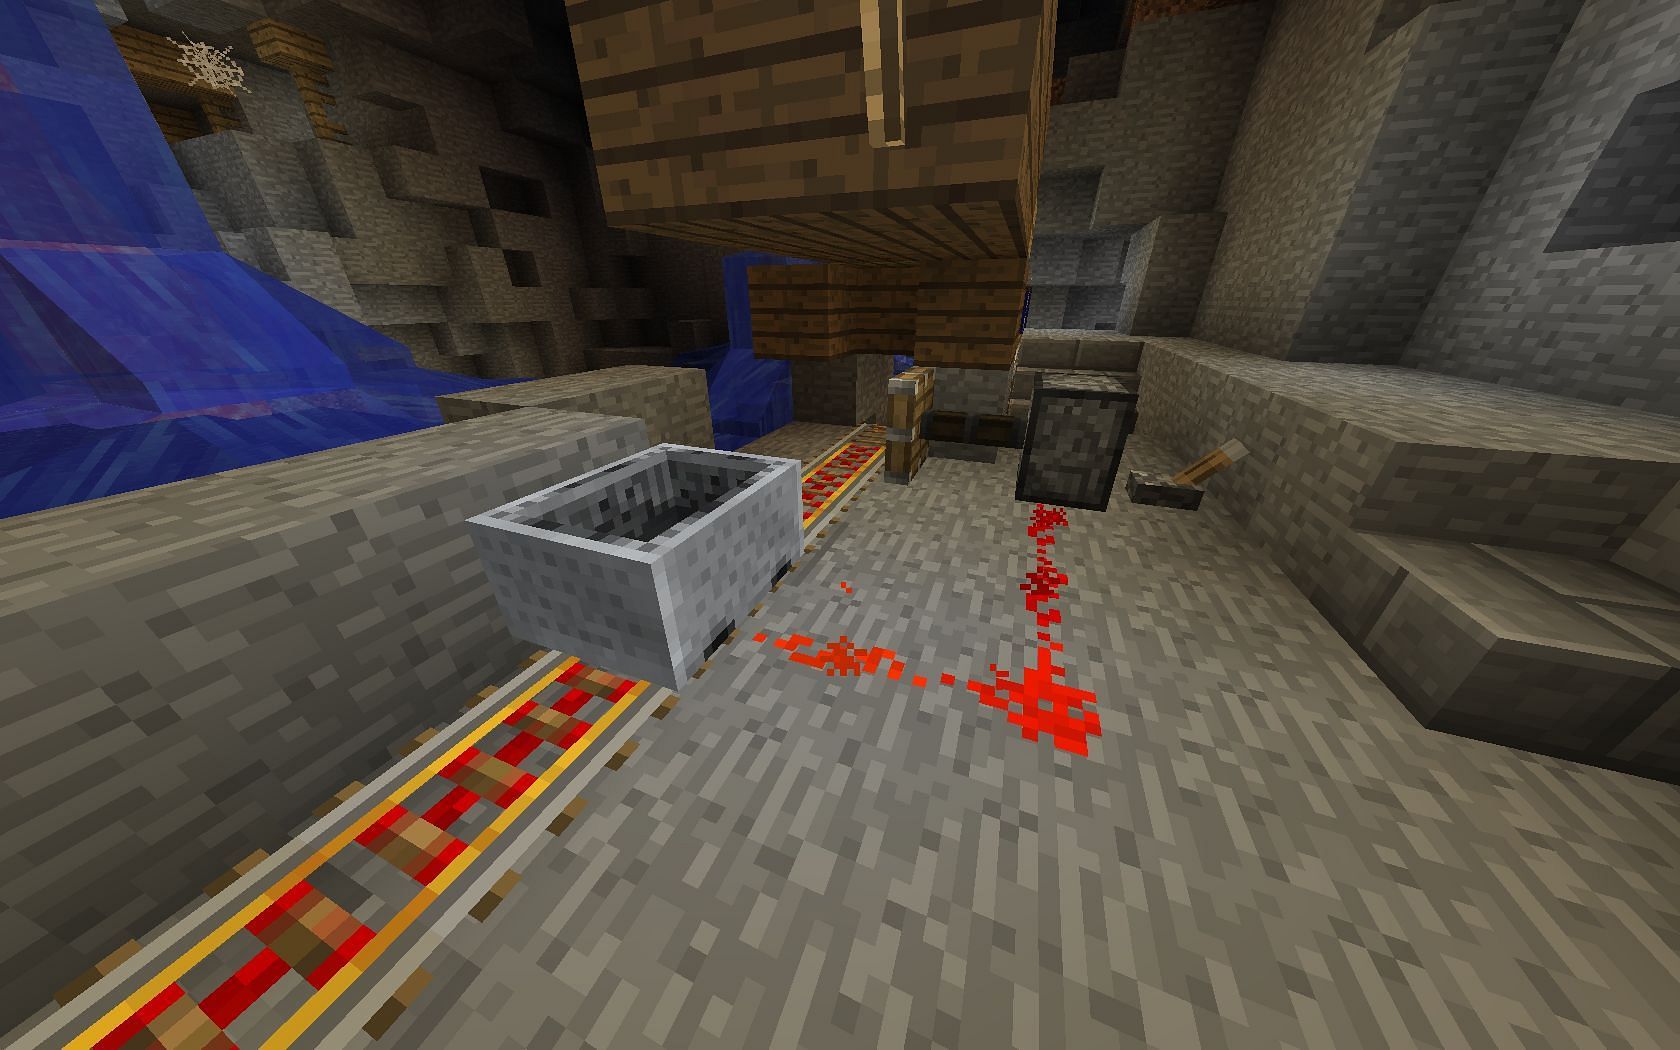 Detector rails will emit a redstone pulse when a cart goes over them. (Image via Minecraft)